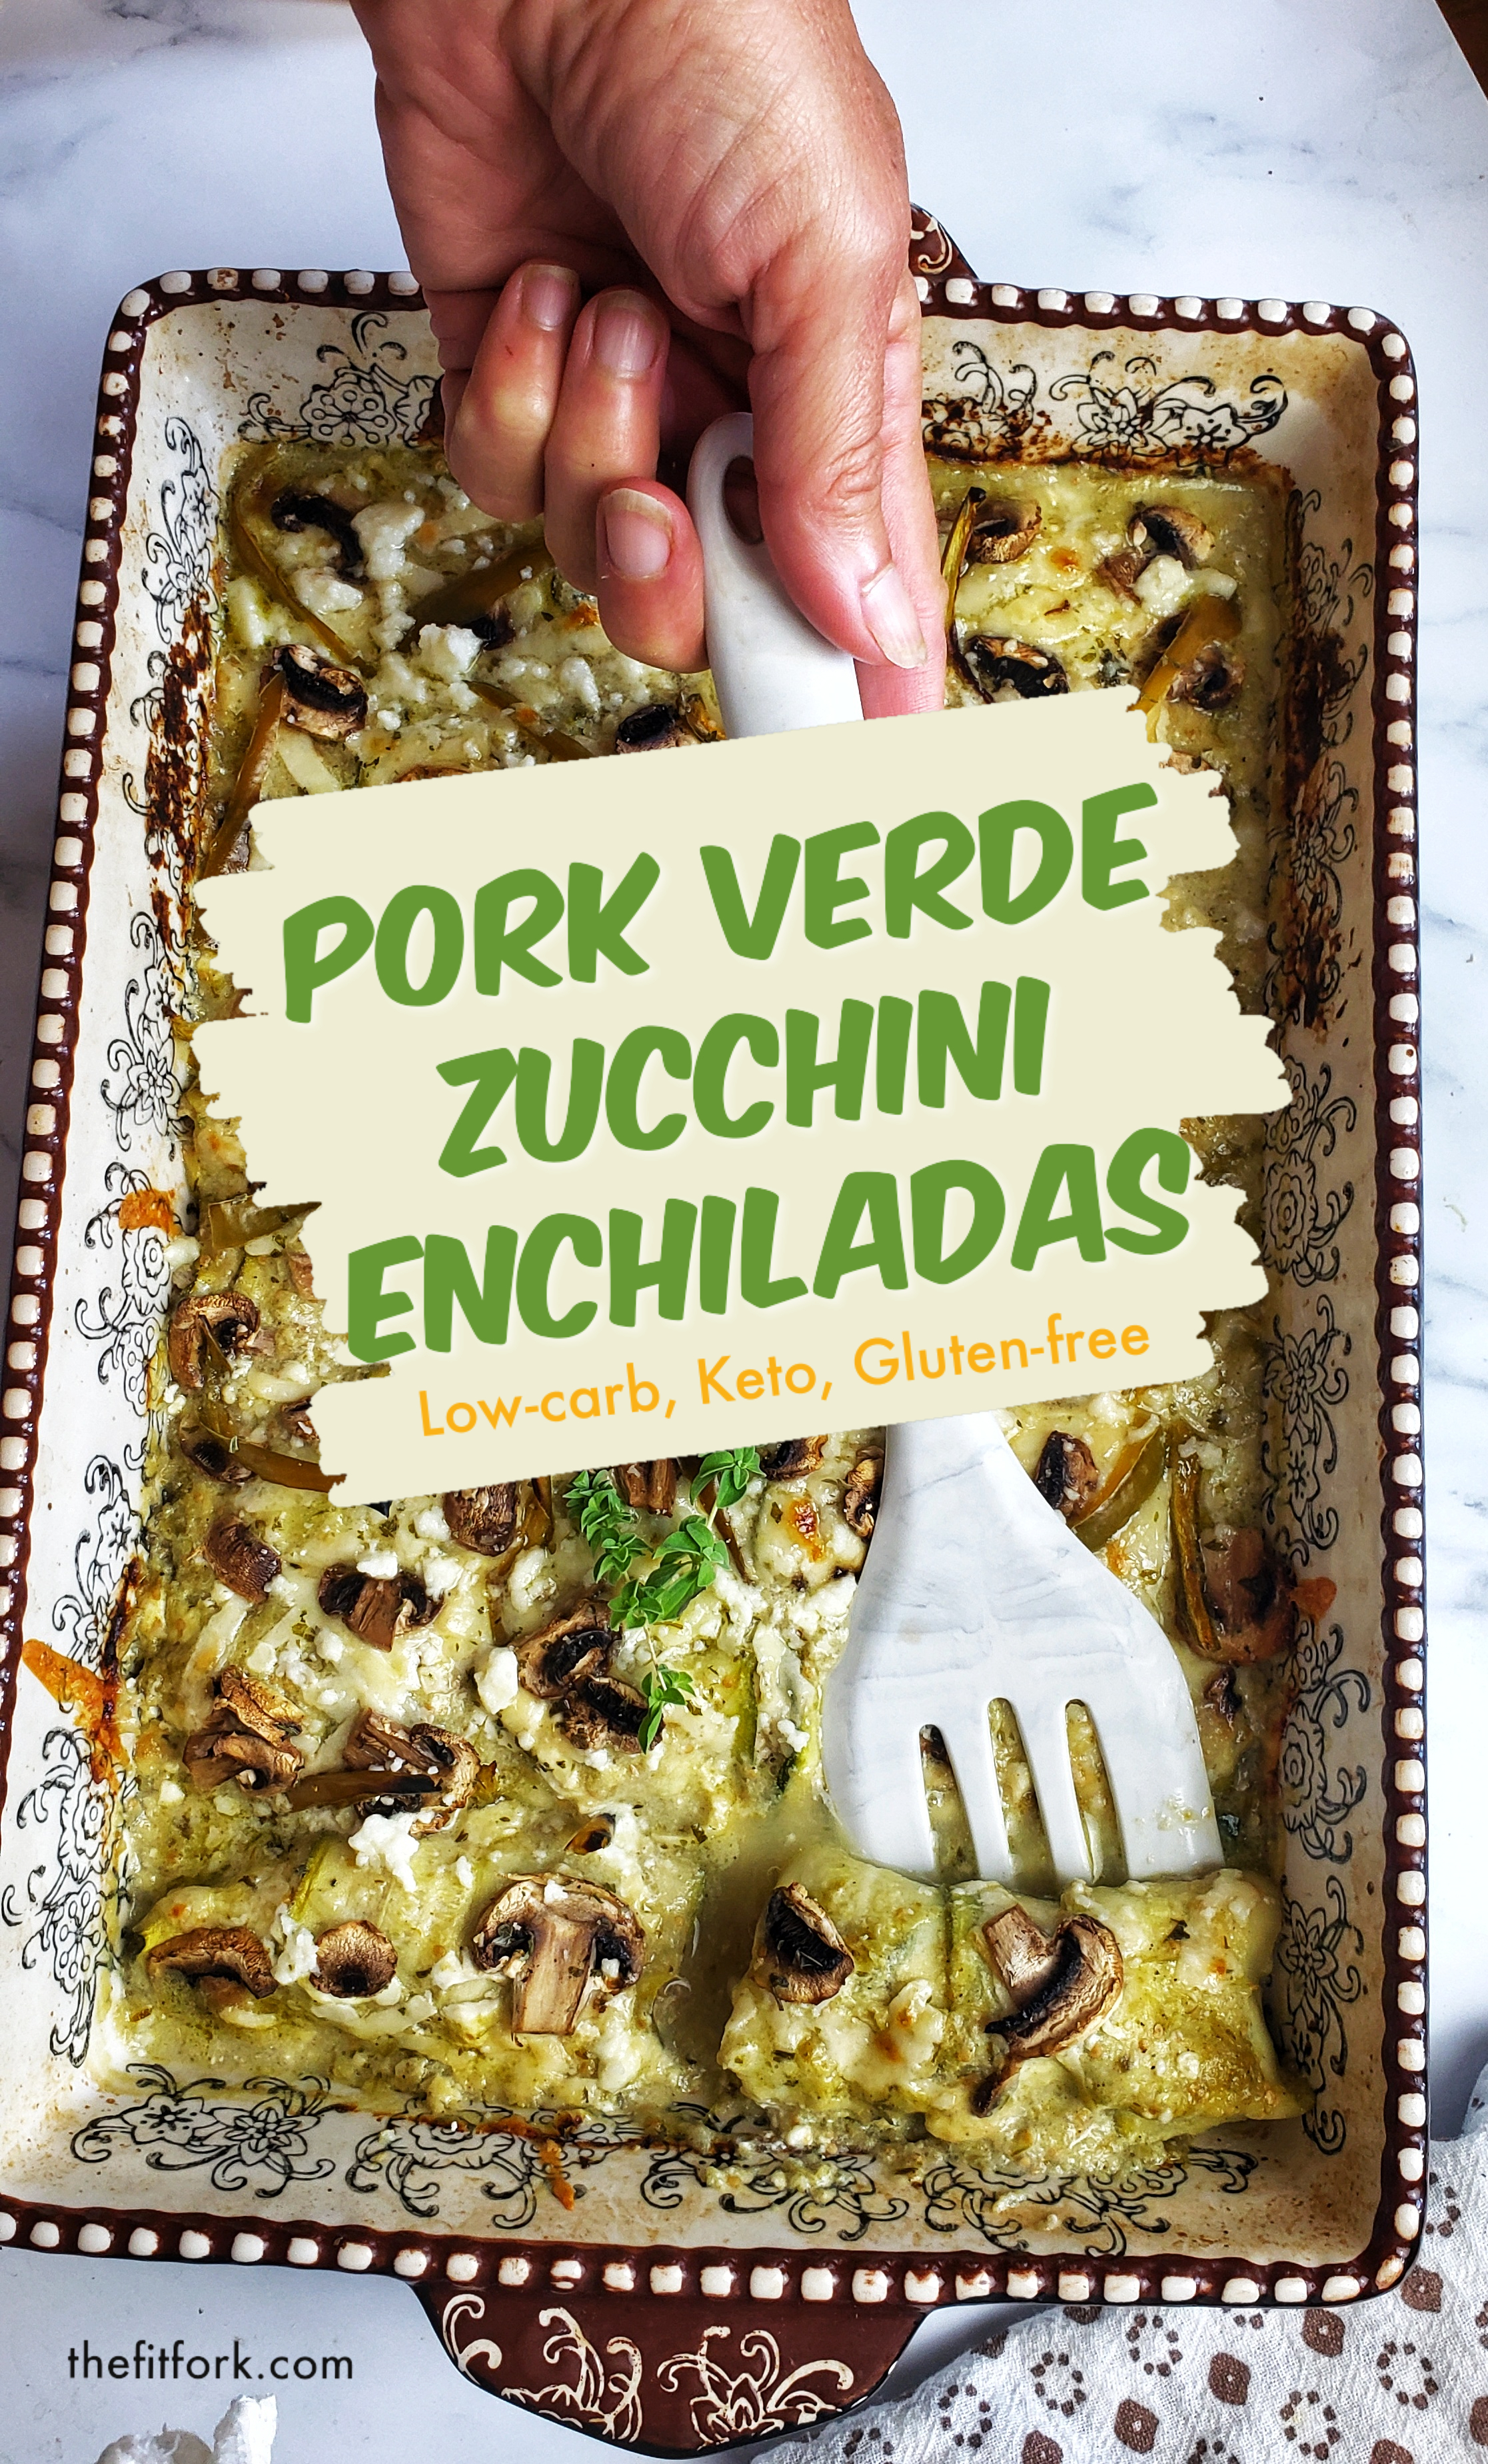 Pork Verde Zucchini Enchiladas  - no tortillas! Low carb, keto friendly, gluten free. A great way to add extra veggies into your life, meal prep and freezer friendly. Green chiles are only mildly spicy so this remains a kid friendly recipes for family diners. 